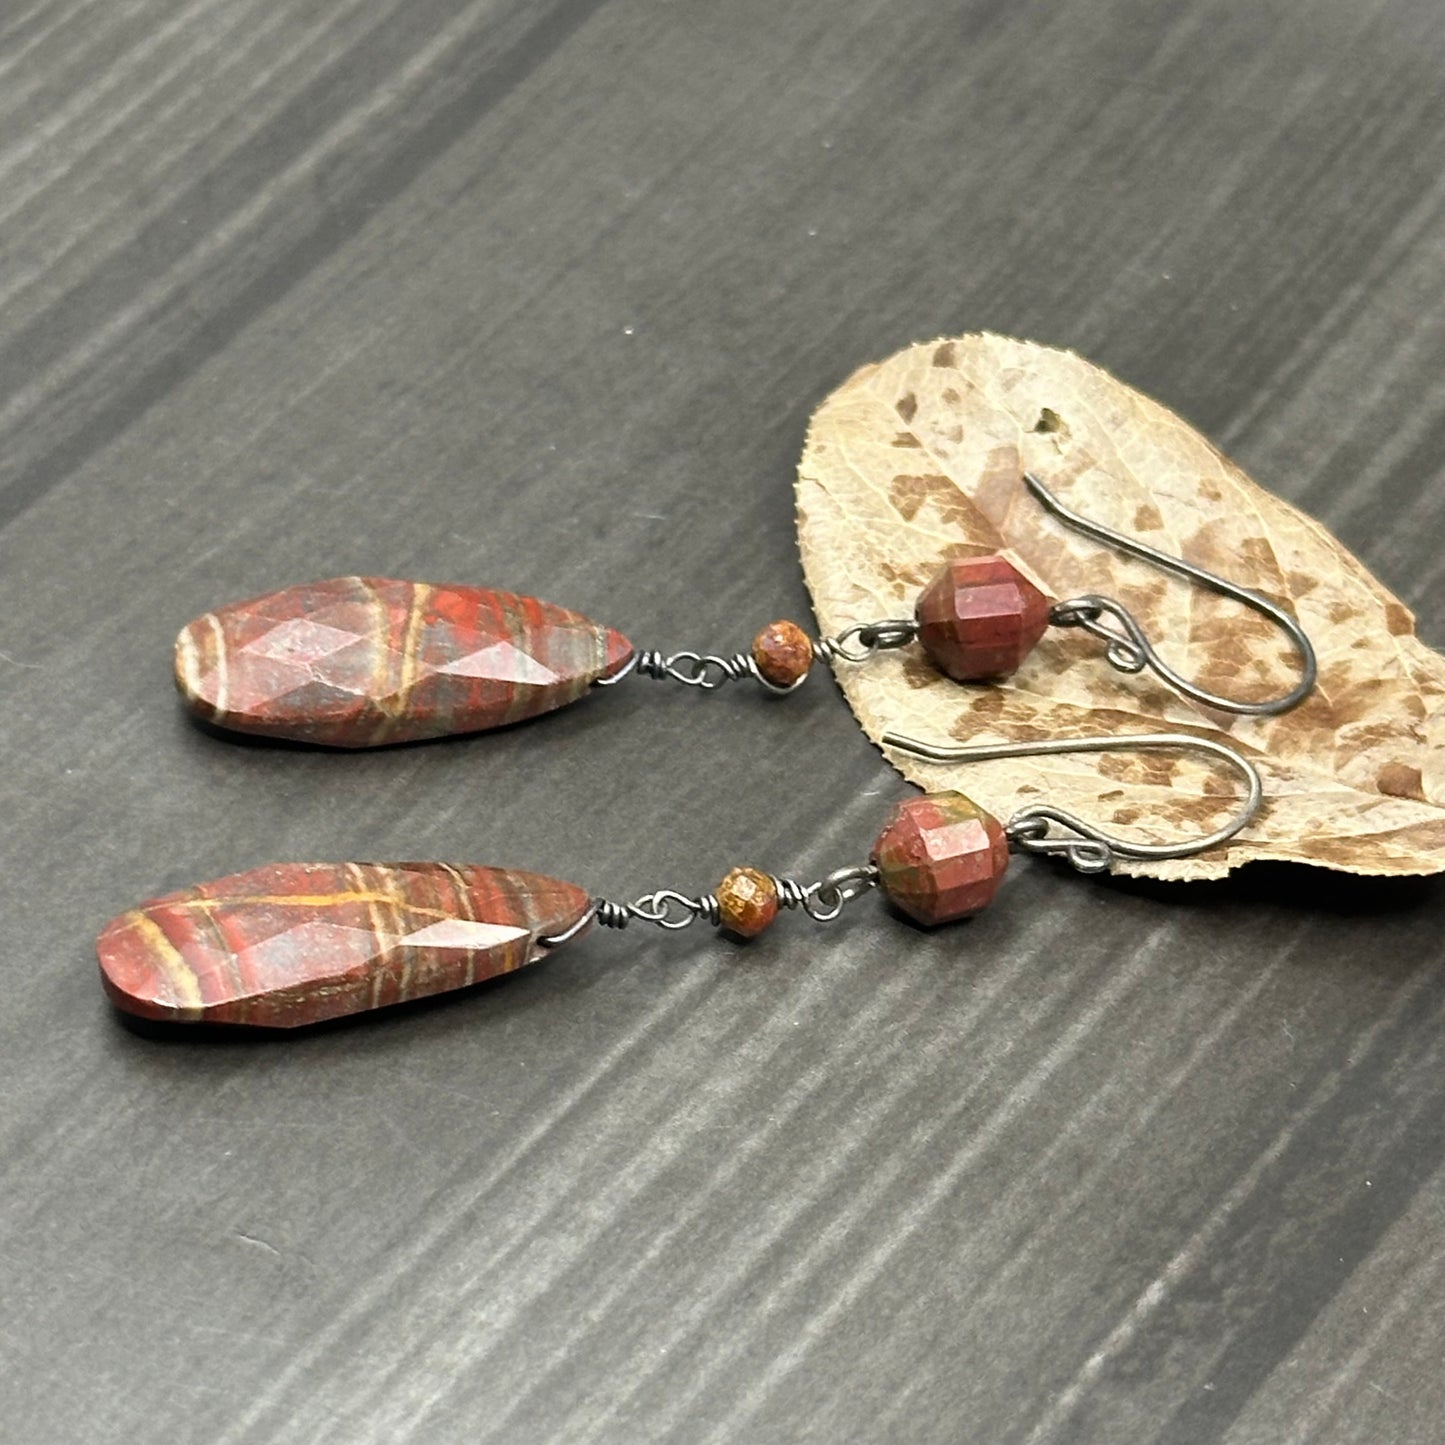 Red Jasper and Agate with Sterling Silver Earrings